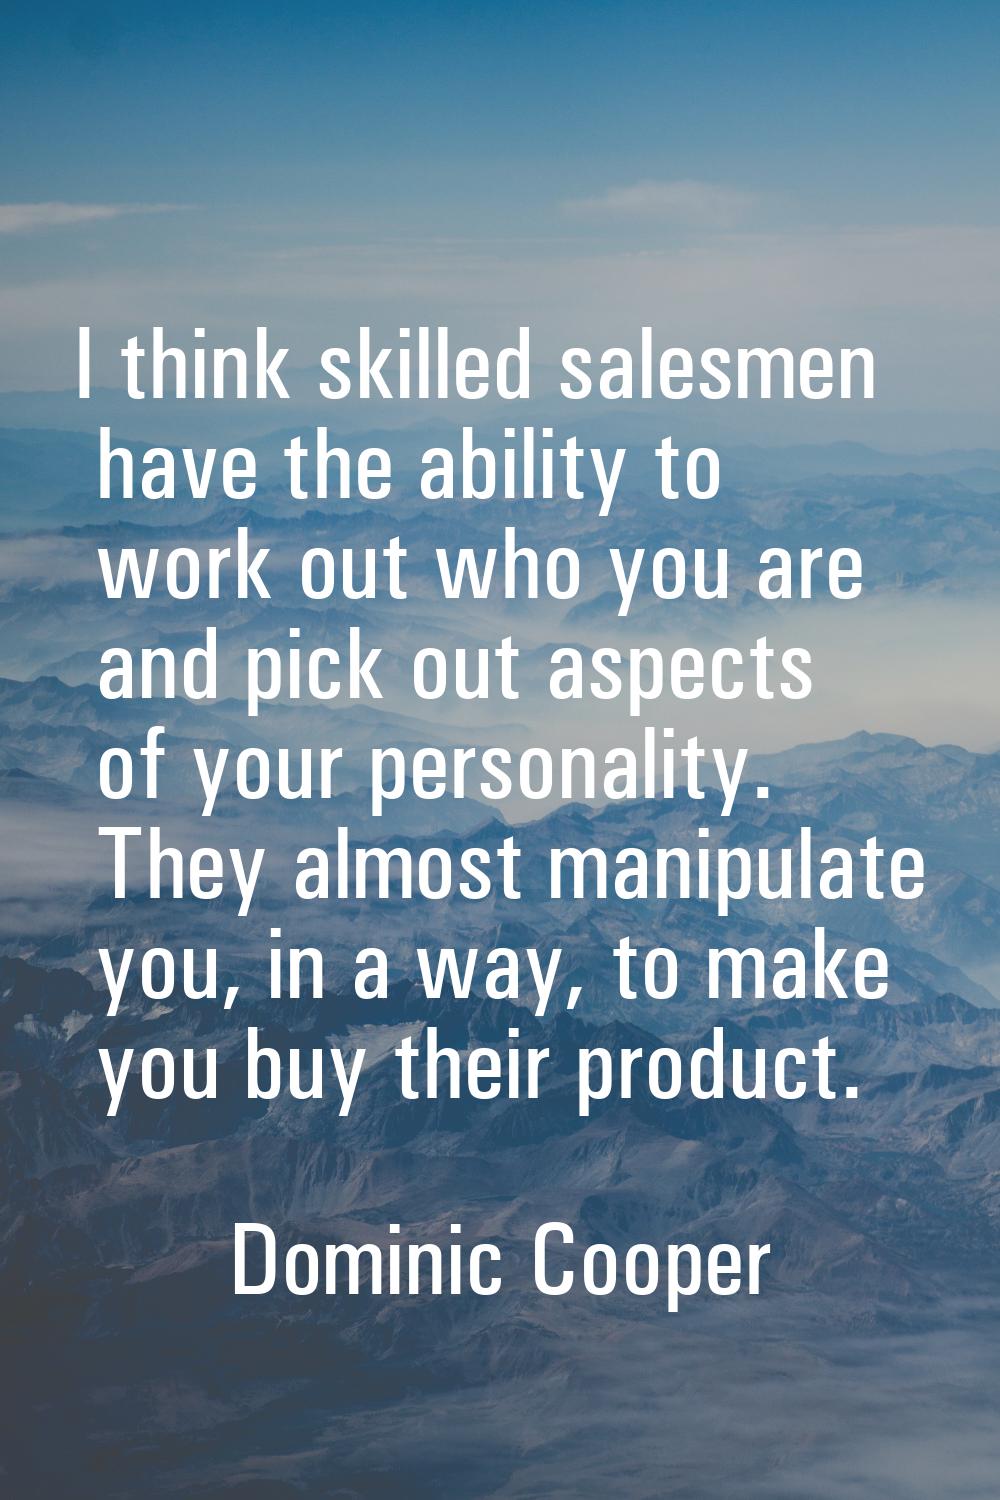 I think skilled salesmen have the ability to work out who you are and pick out aspects of your pers